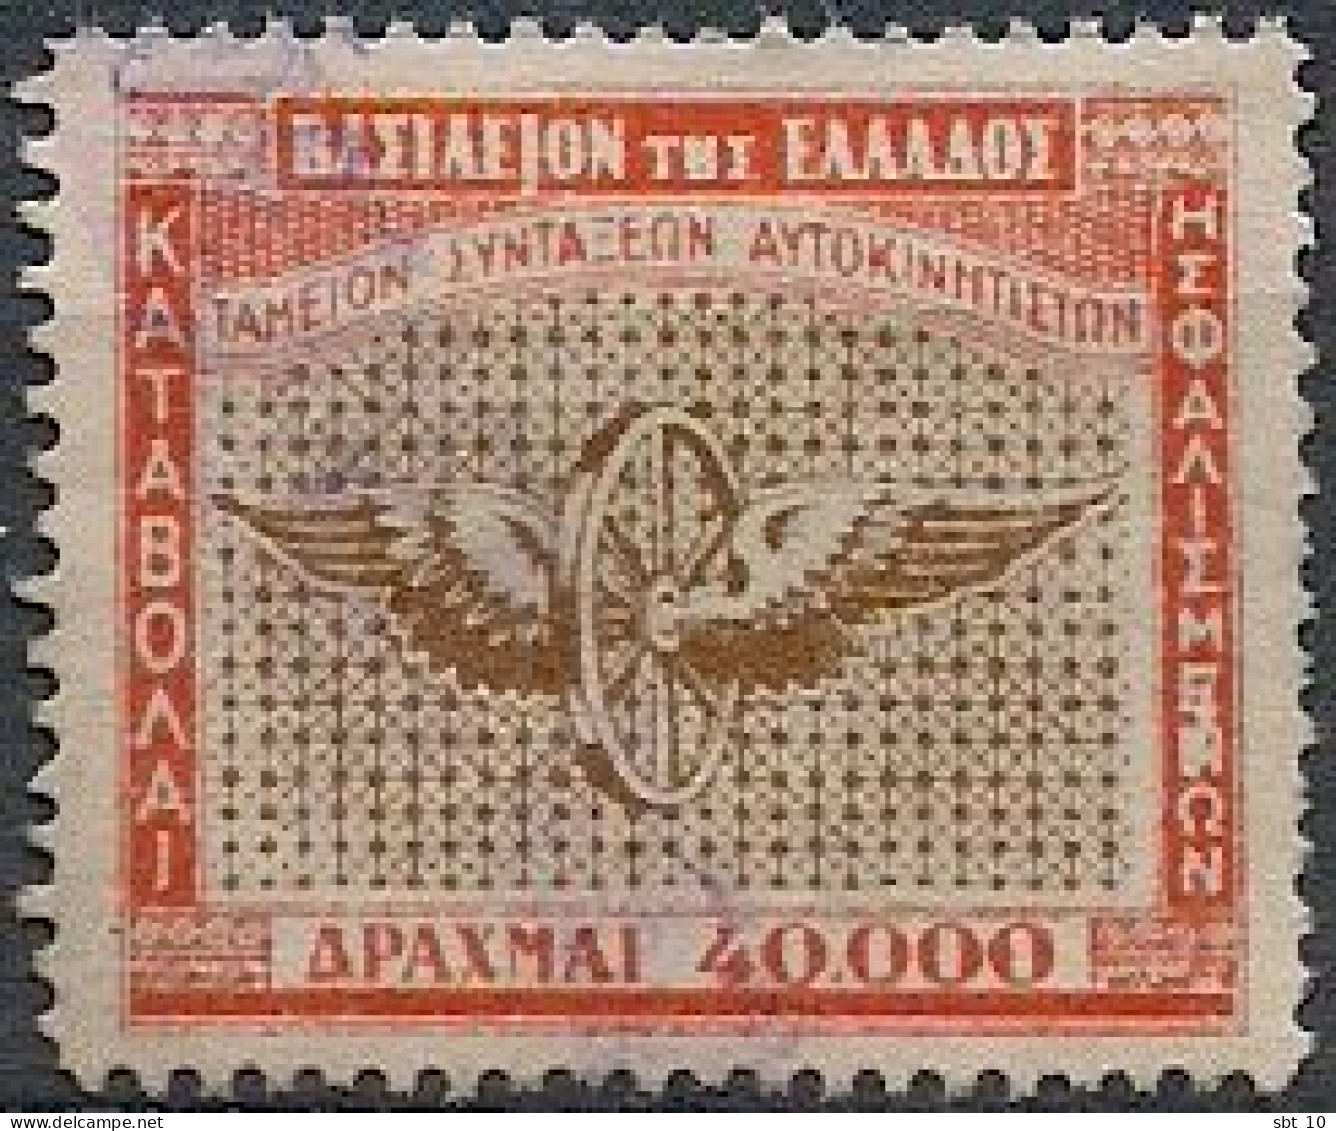 Greece - Pension Fund For Motorists 40000dr. Revenue Stamps - Used - Fiscale Zegels